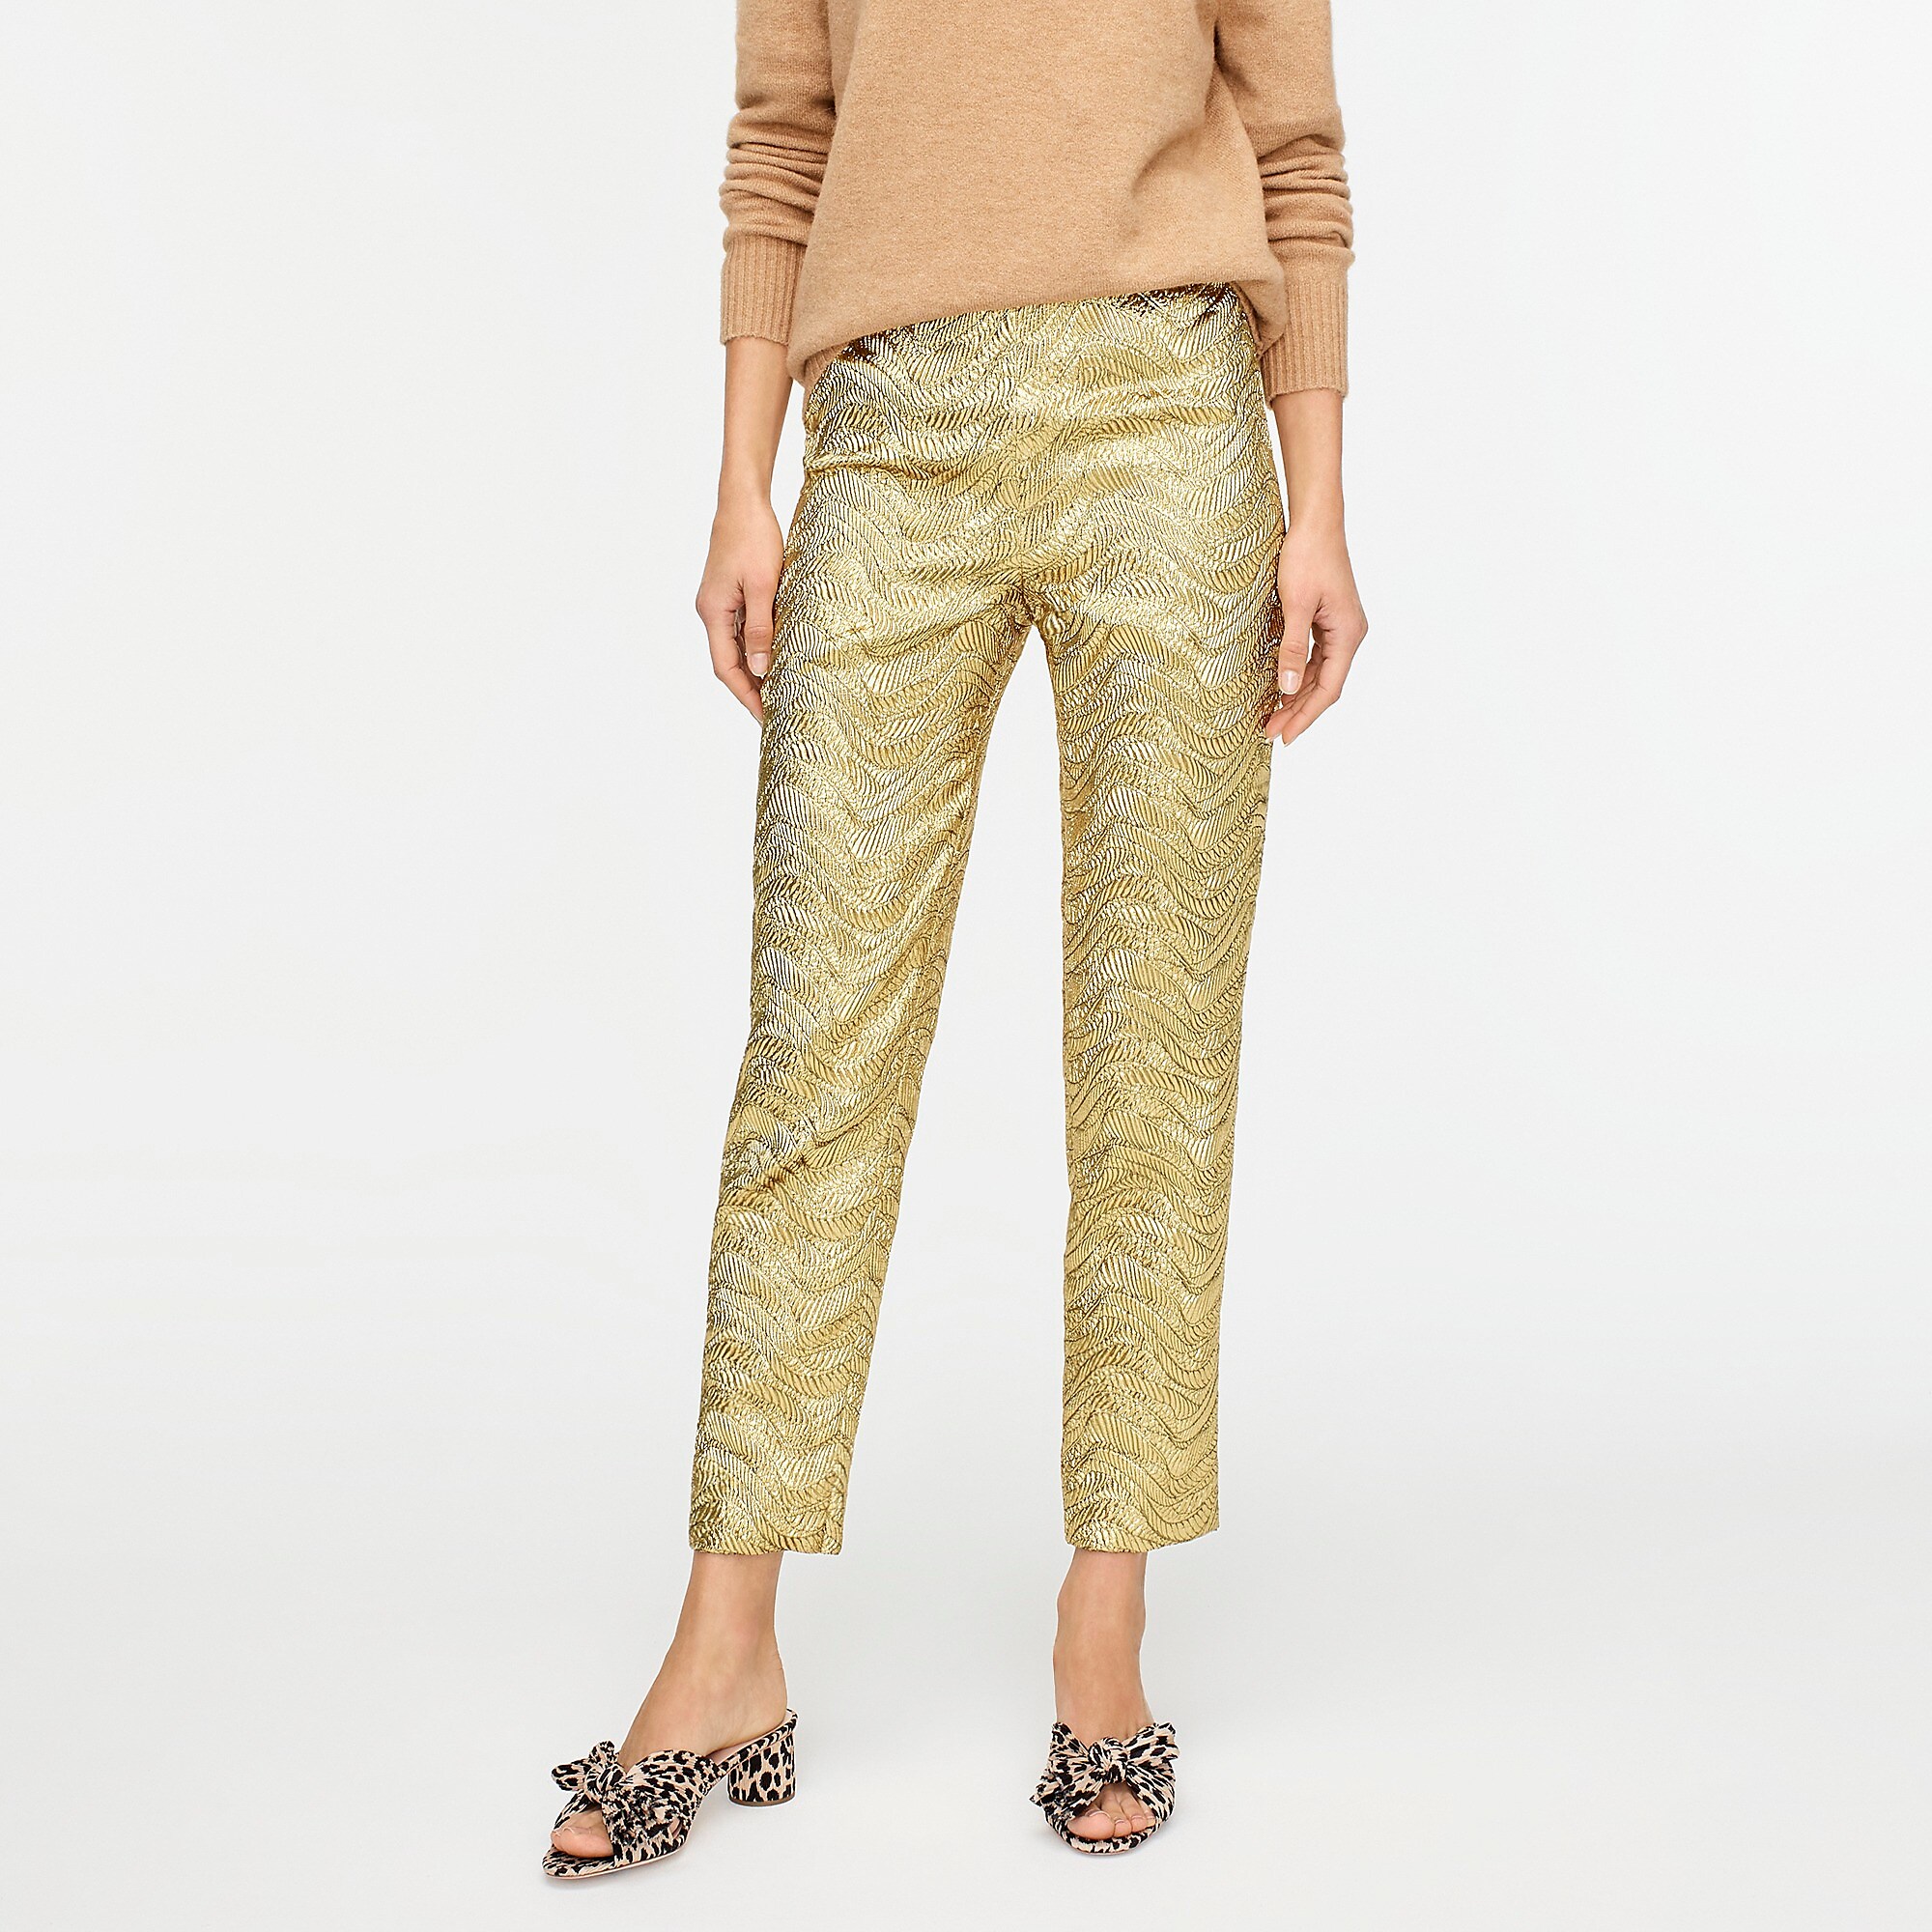 WEEKLY FINDS // J.Crew Collection high-rise cigarette pant in metallic leaf jacquard 